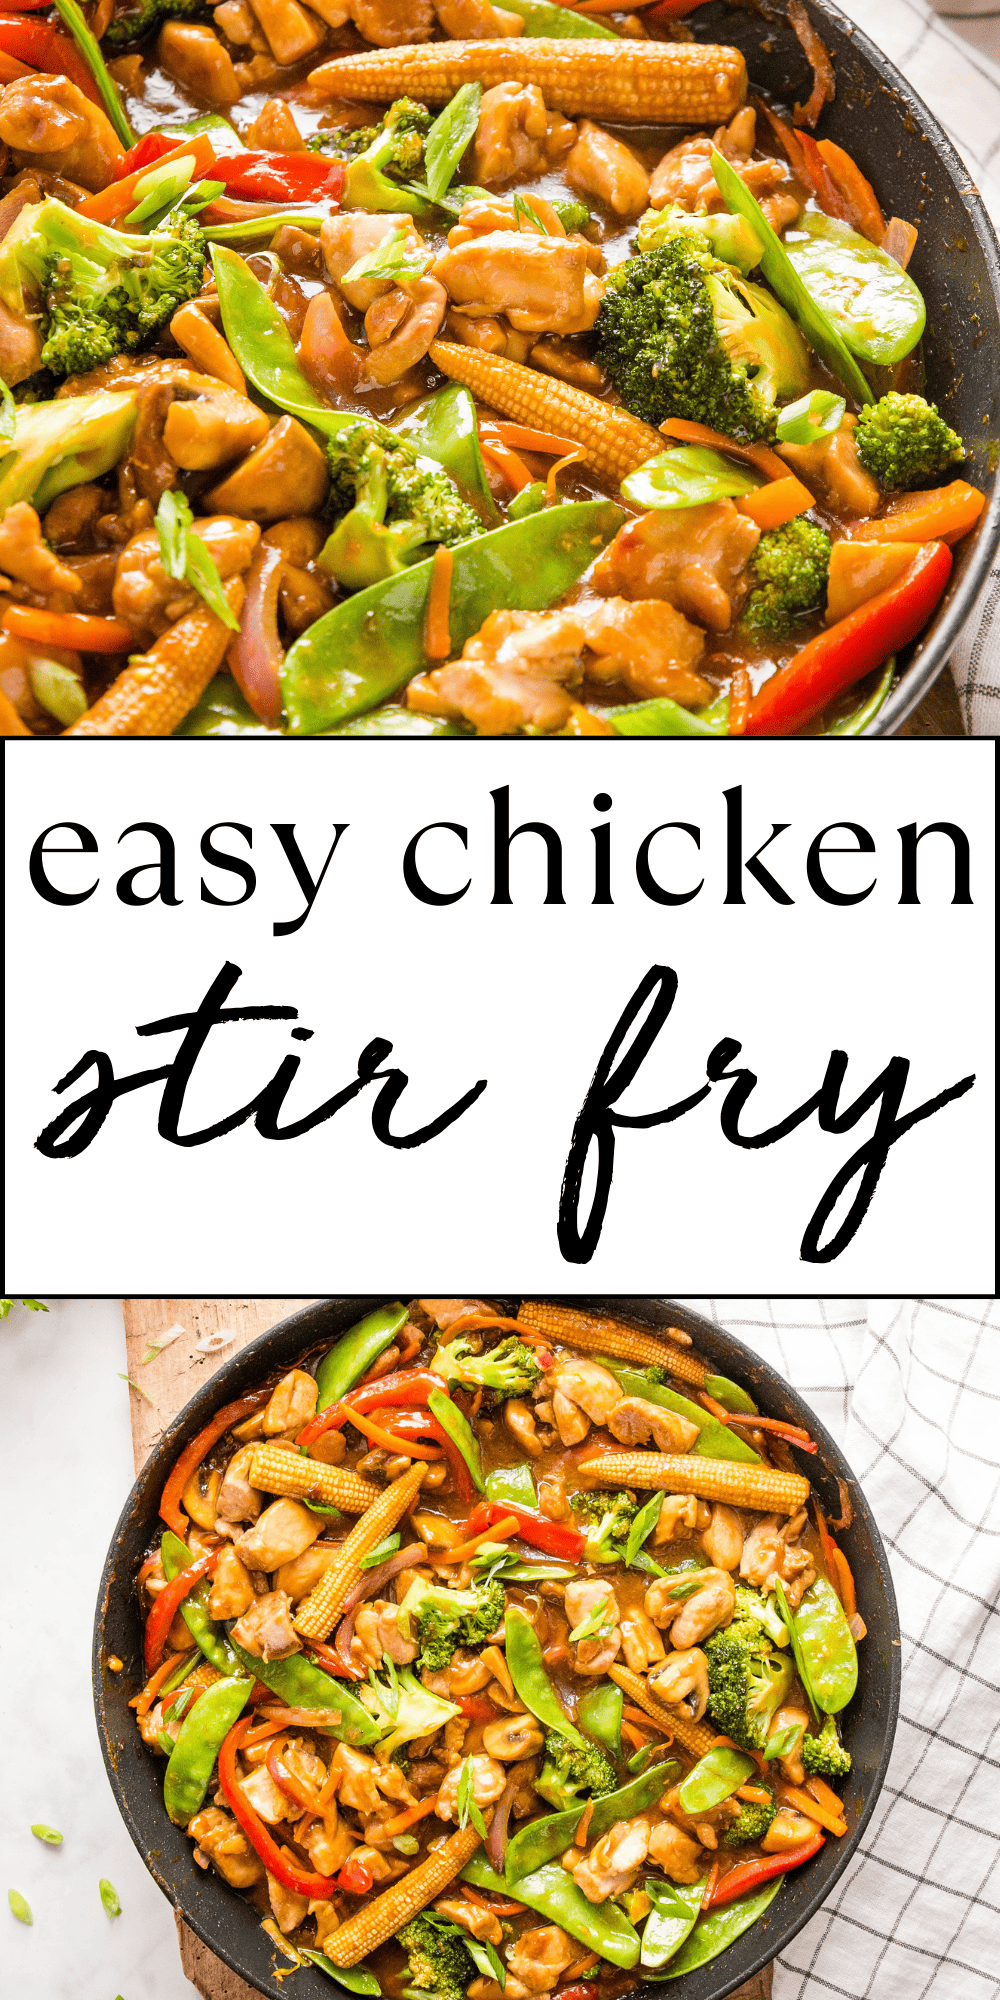 This Chicken Stir Fry recipe is an easy weeknight meal that's packed with protein and fresh vegetables - on the table in under 30 minutes. A simple chicken stir fry with an easy sauce and marinade - perfect for meal prep! Recipe from thebusybaker.ca! #chickenstirfry #easystirfry #healthystirfry #chickenmarinade #stirfrysauce #easystirfryrecipe #stirfryrecipe #chickenrecipe #easyweeknightmeal #familymeal #healthymeal via @busybakerblog